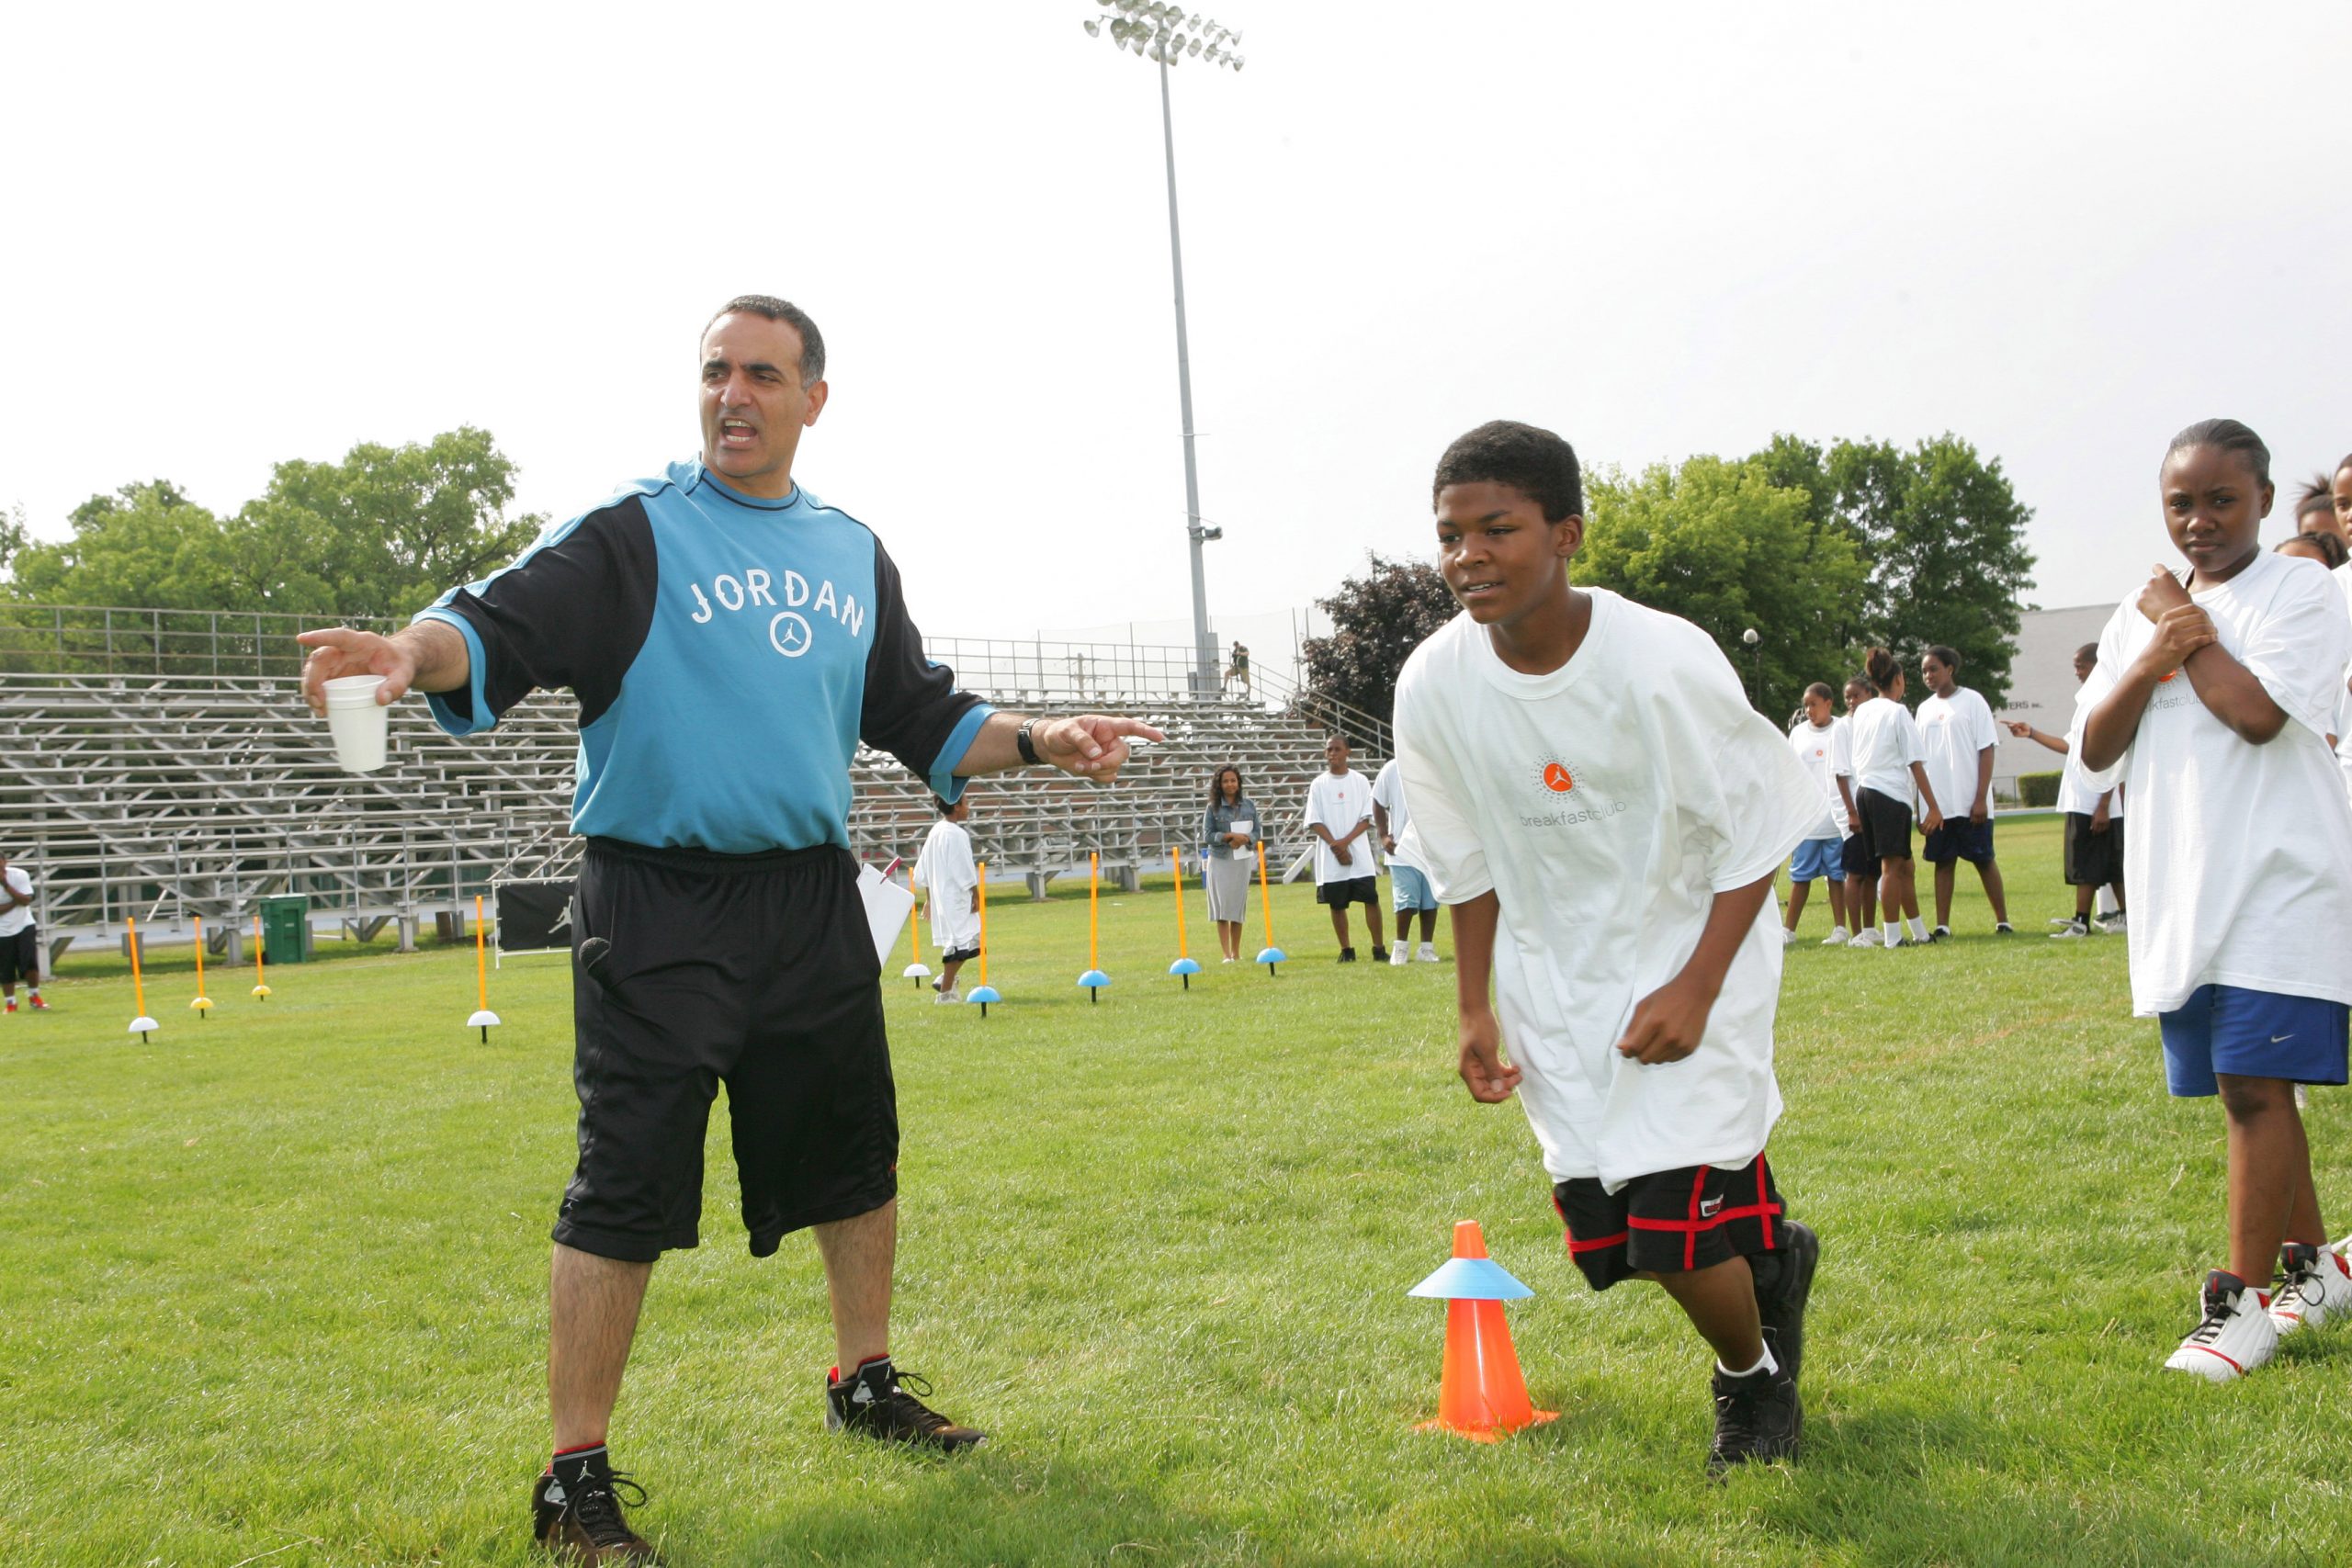 Tim Grover works with some young athletes.